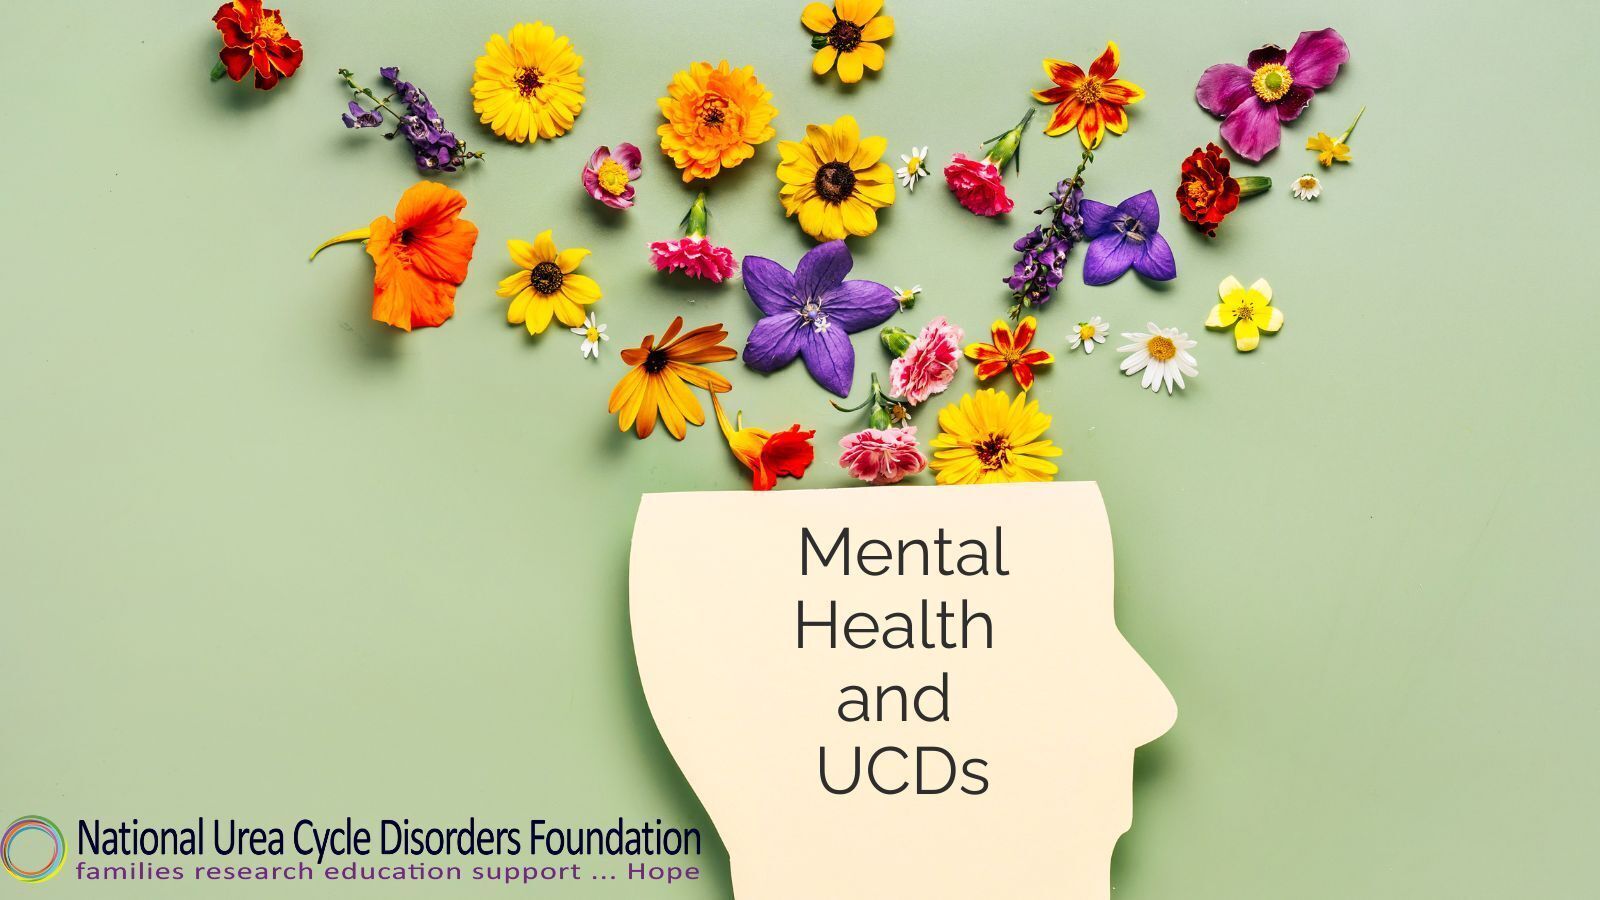 Mental Health and UCDs: A Mindful Approach